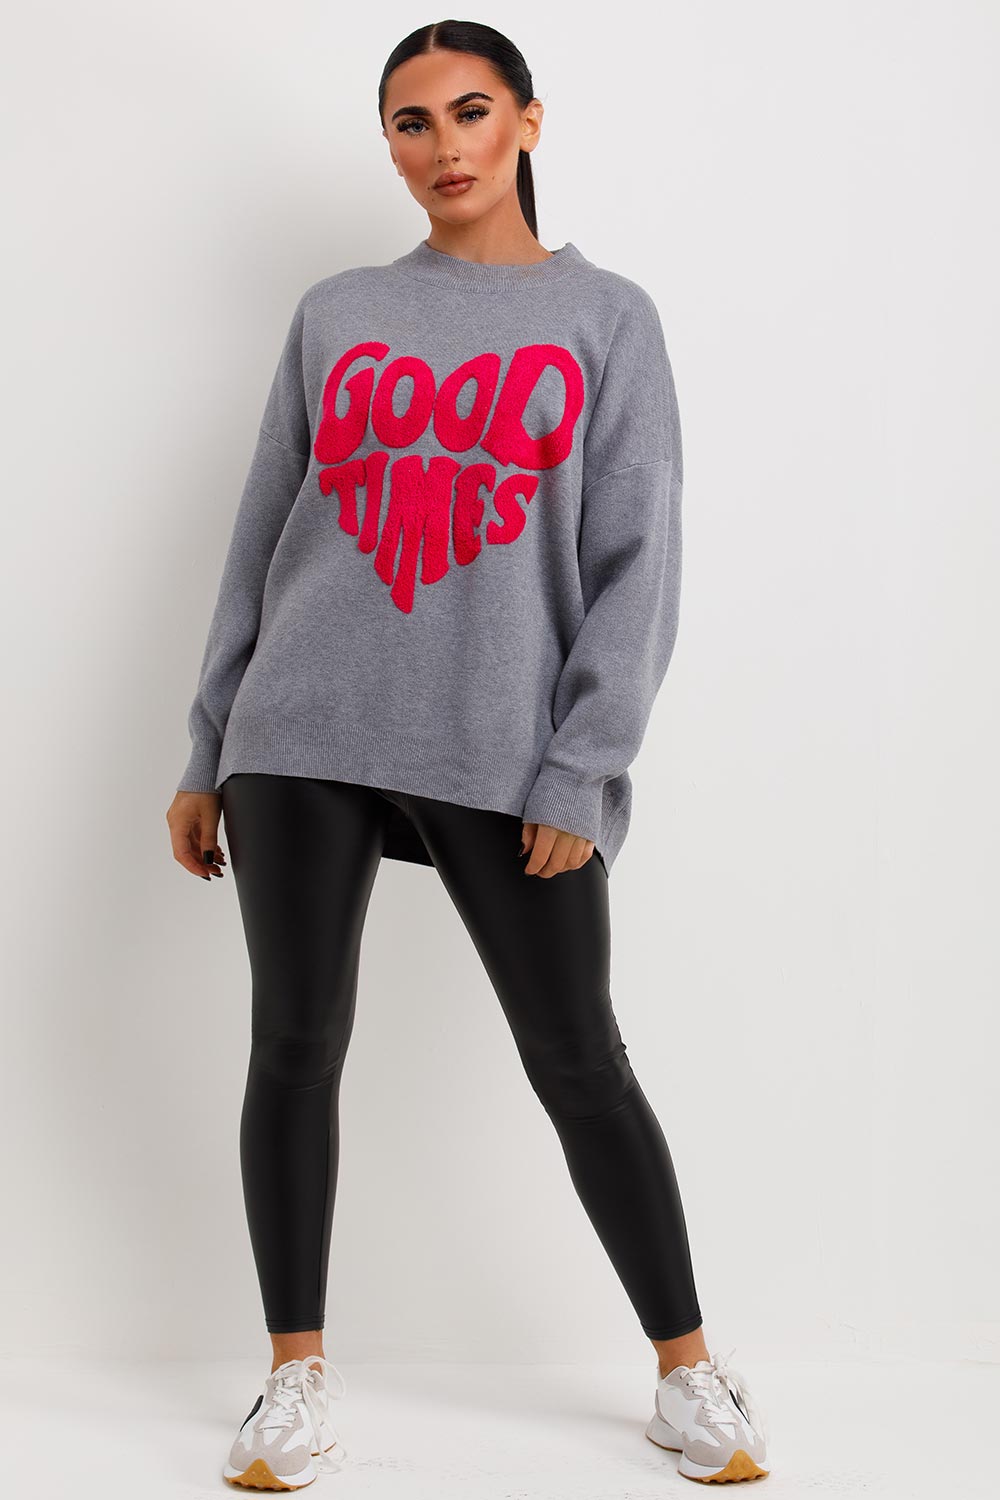 womens knitted jumper with good times slogan